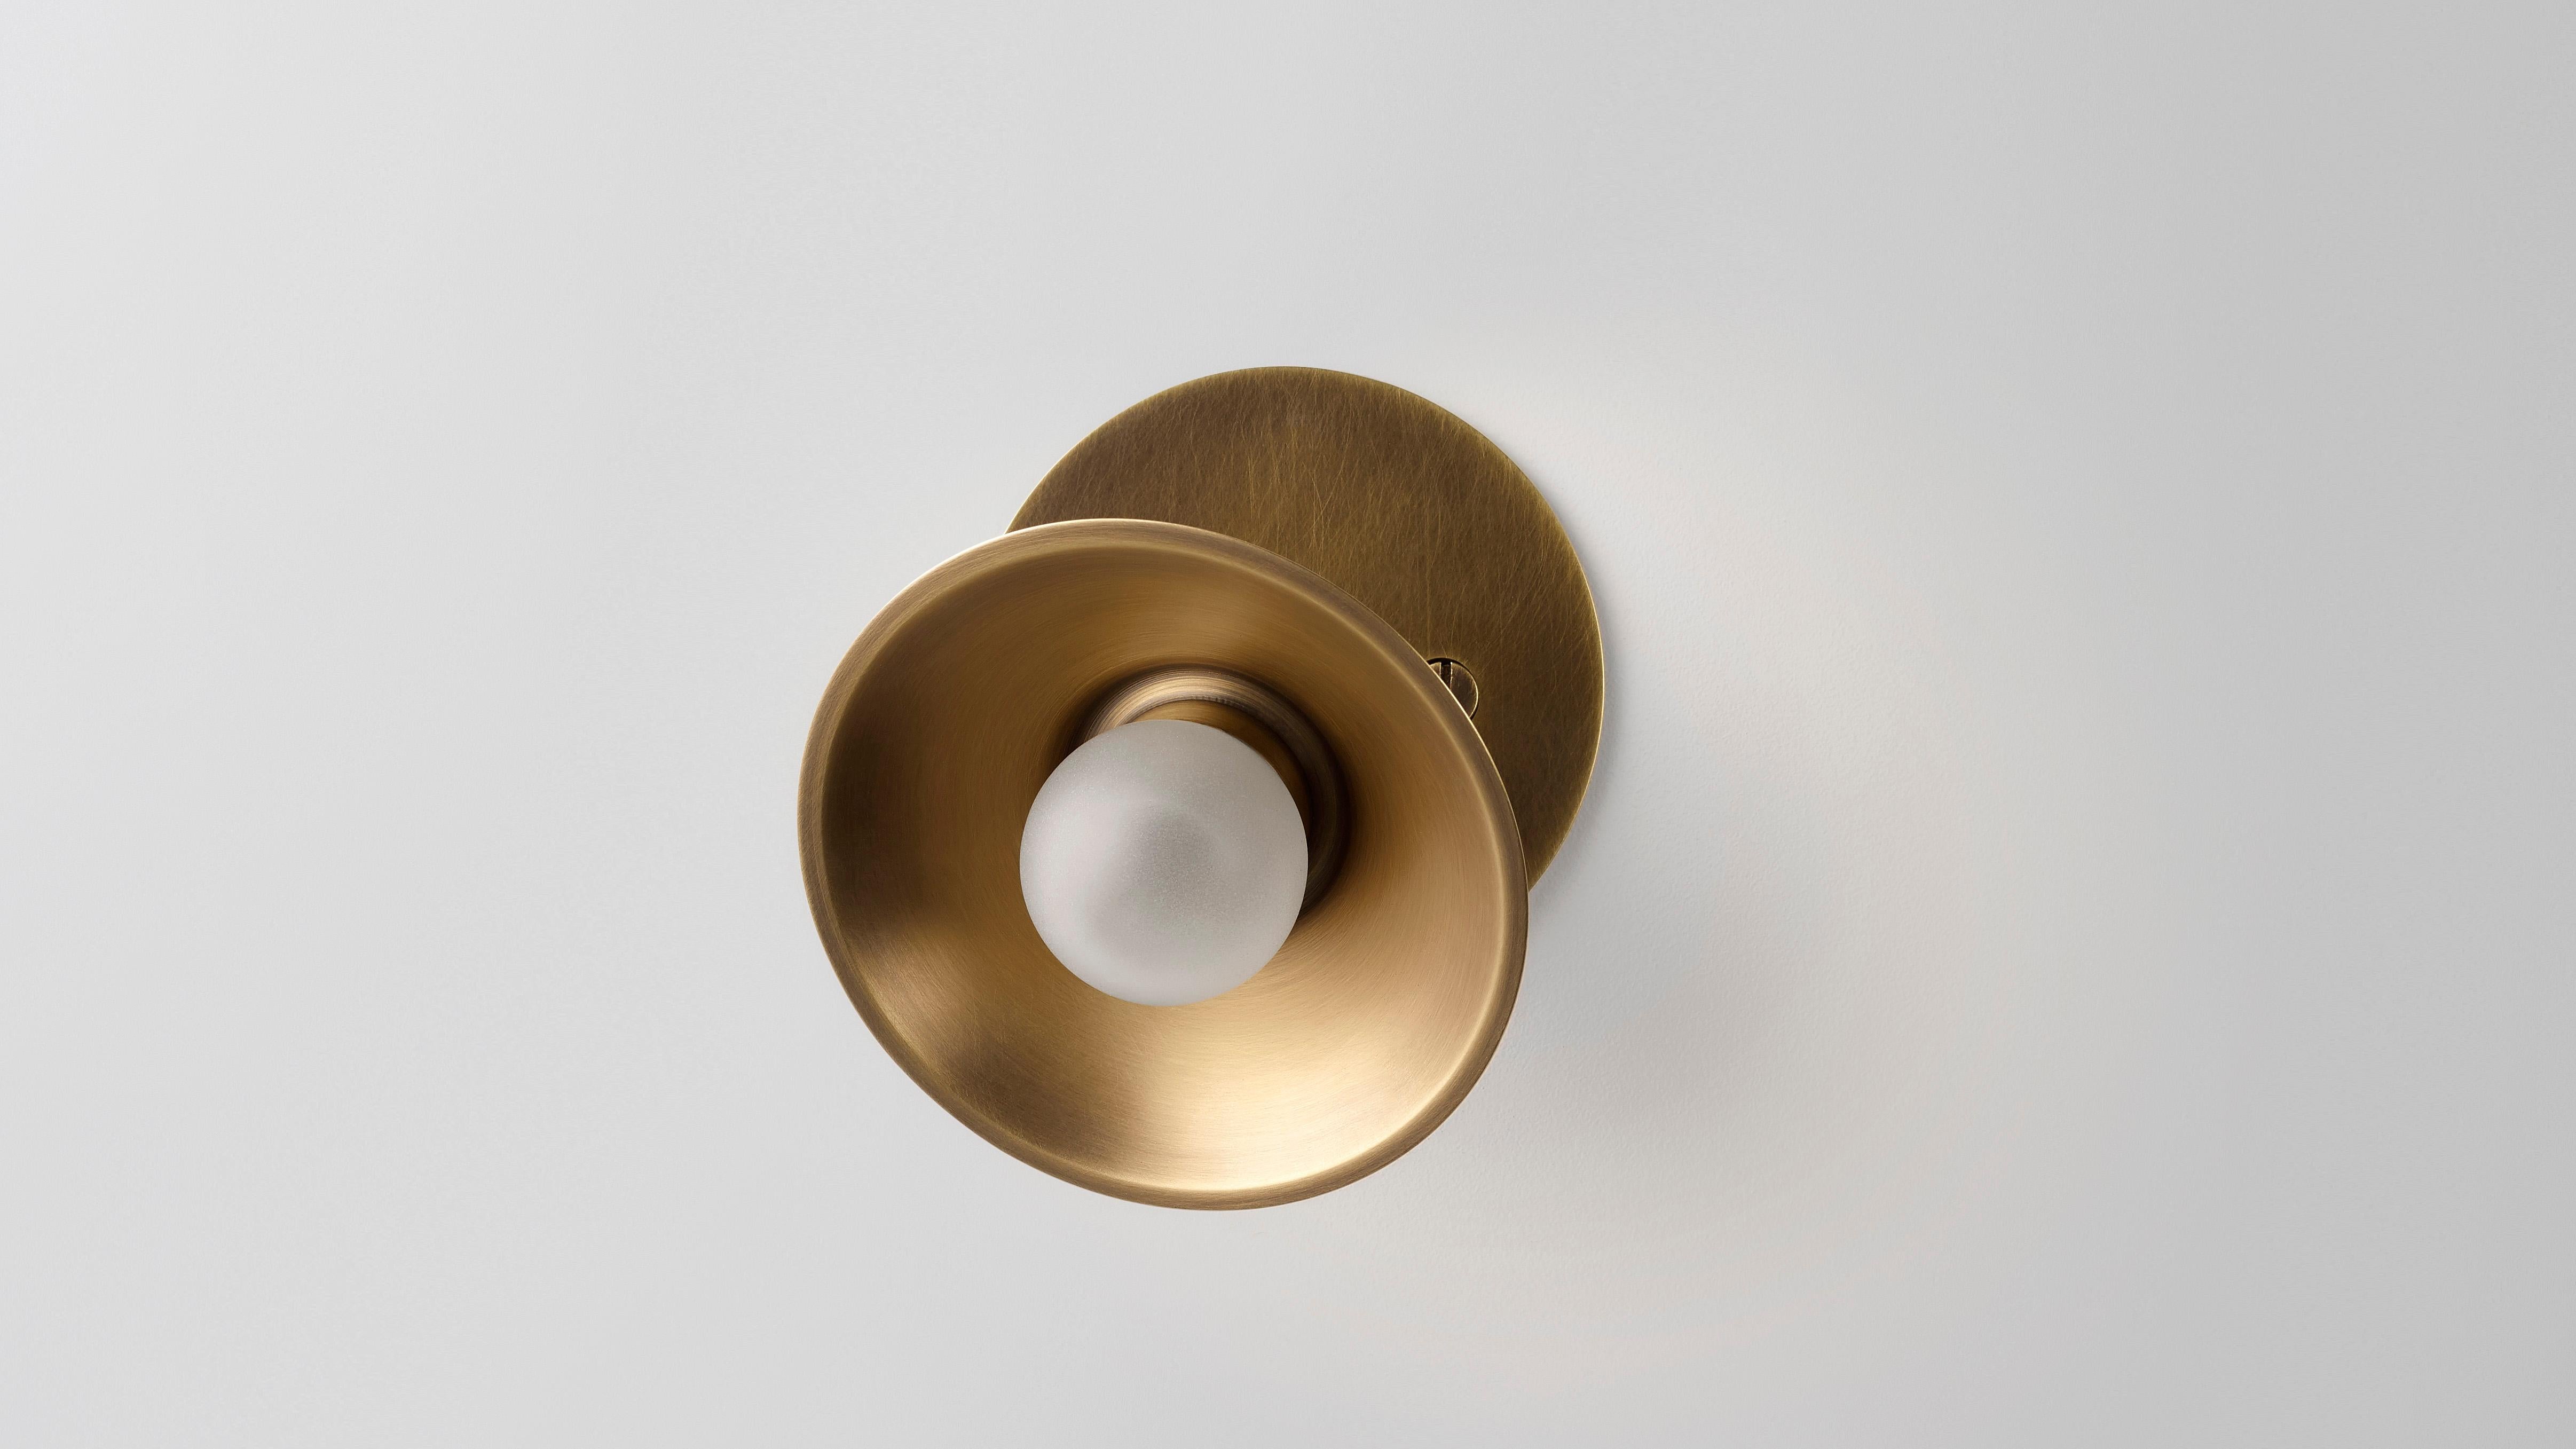 Baby wall swing sconce by Volker Haug
Dimensions: Diameter 10.5 x Height 9.5 cm 
Material: Brass. 
Finish: Polished, aged, brushed, bronzed, blackened, or plated
Light: G4 - 12V, LED x 1
Power supply: 110V-240V, 12V transformer